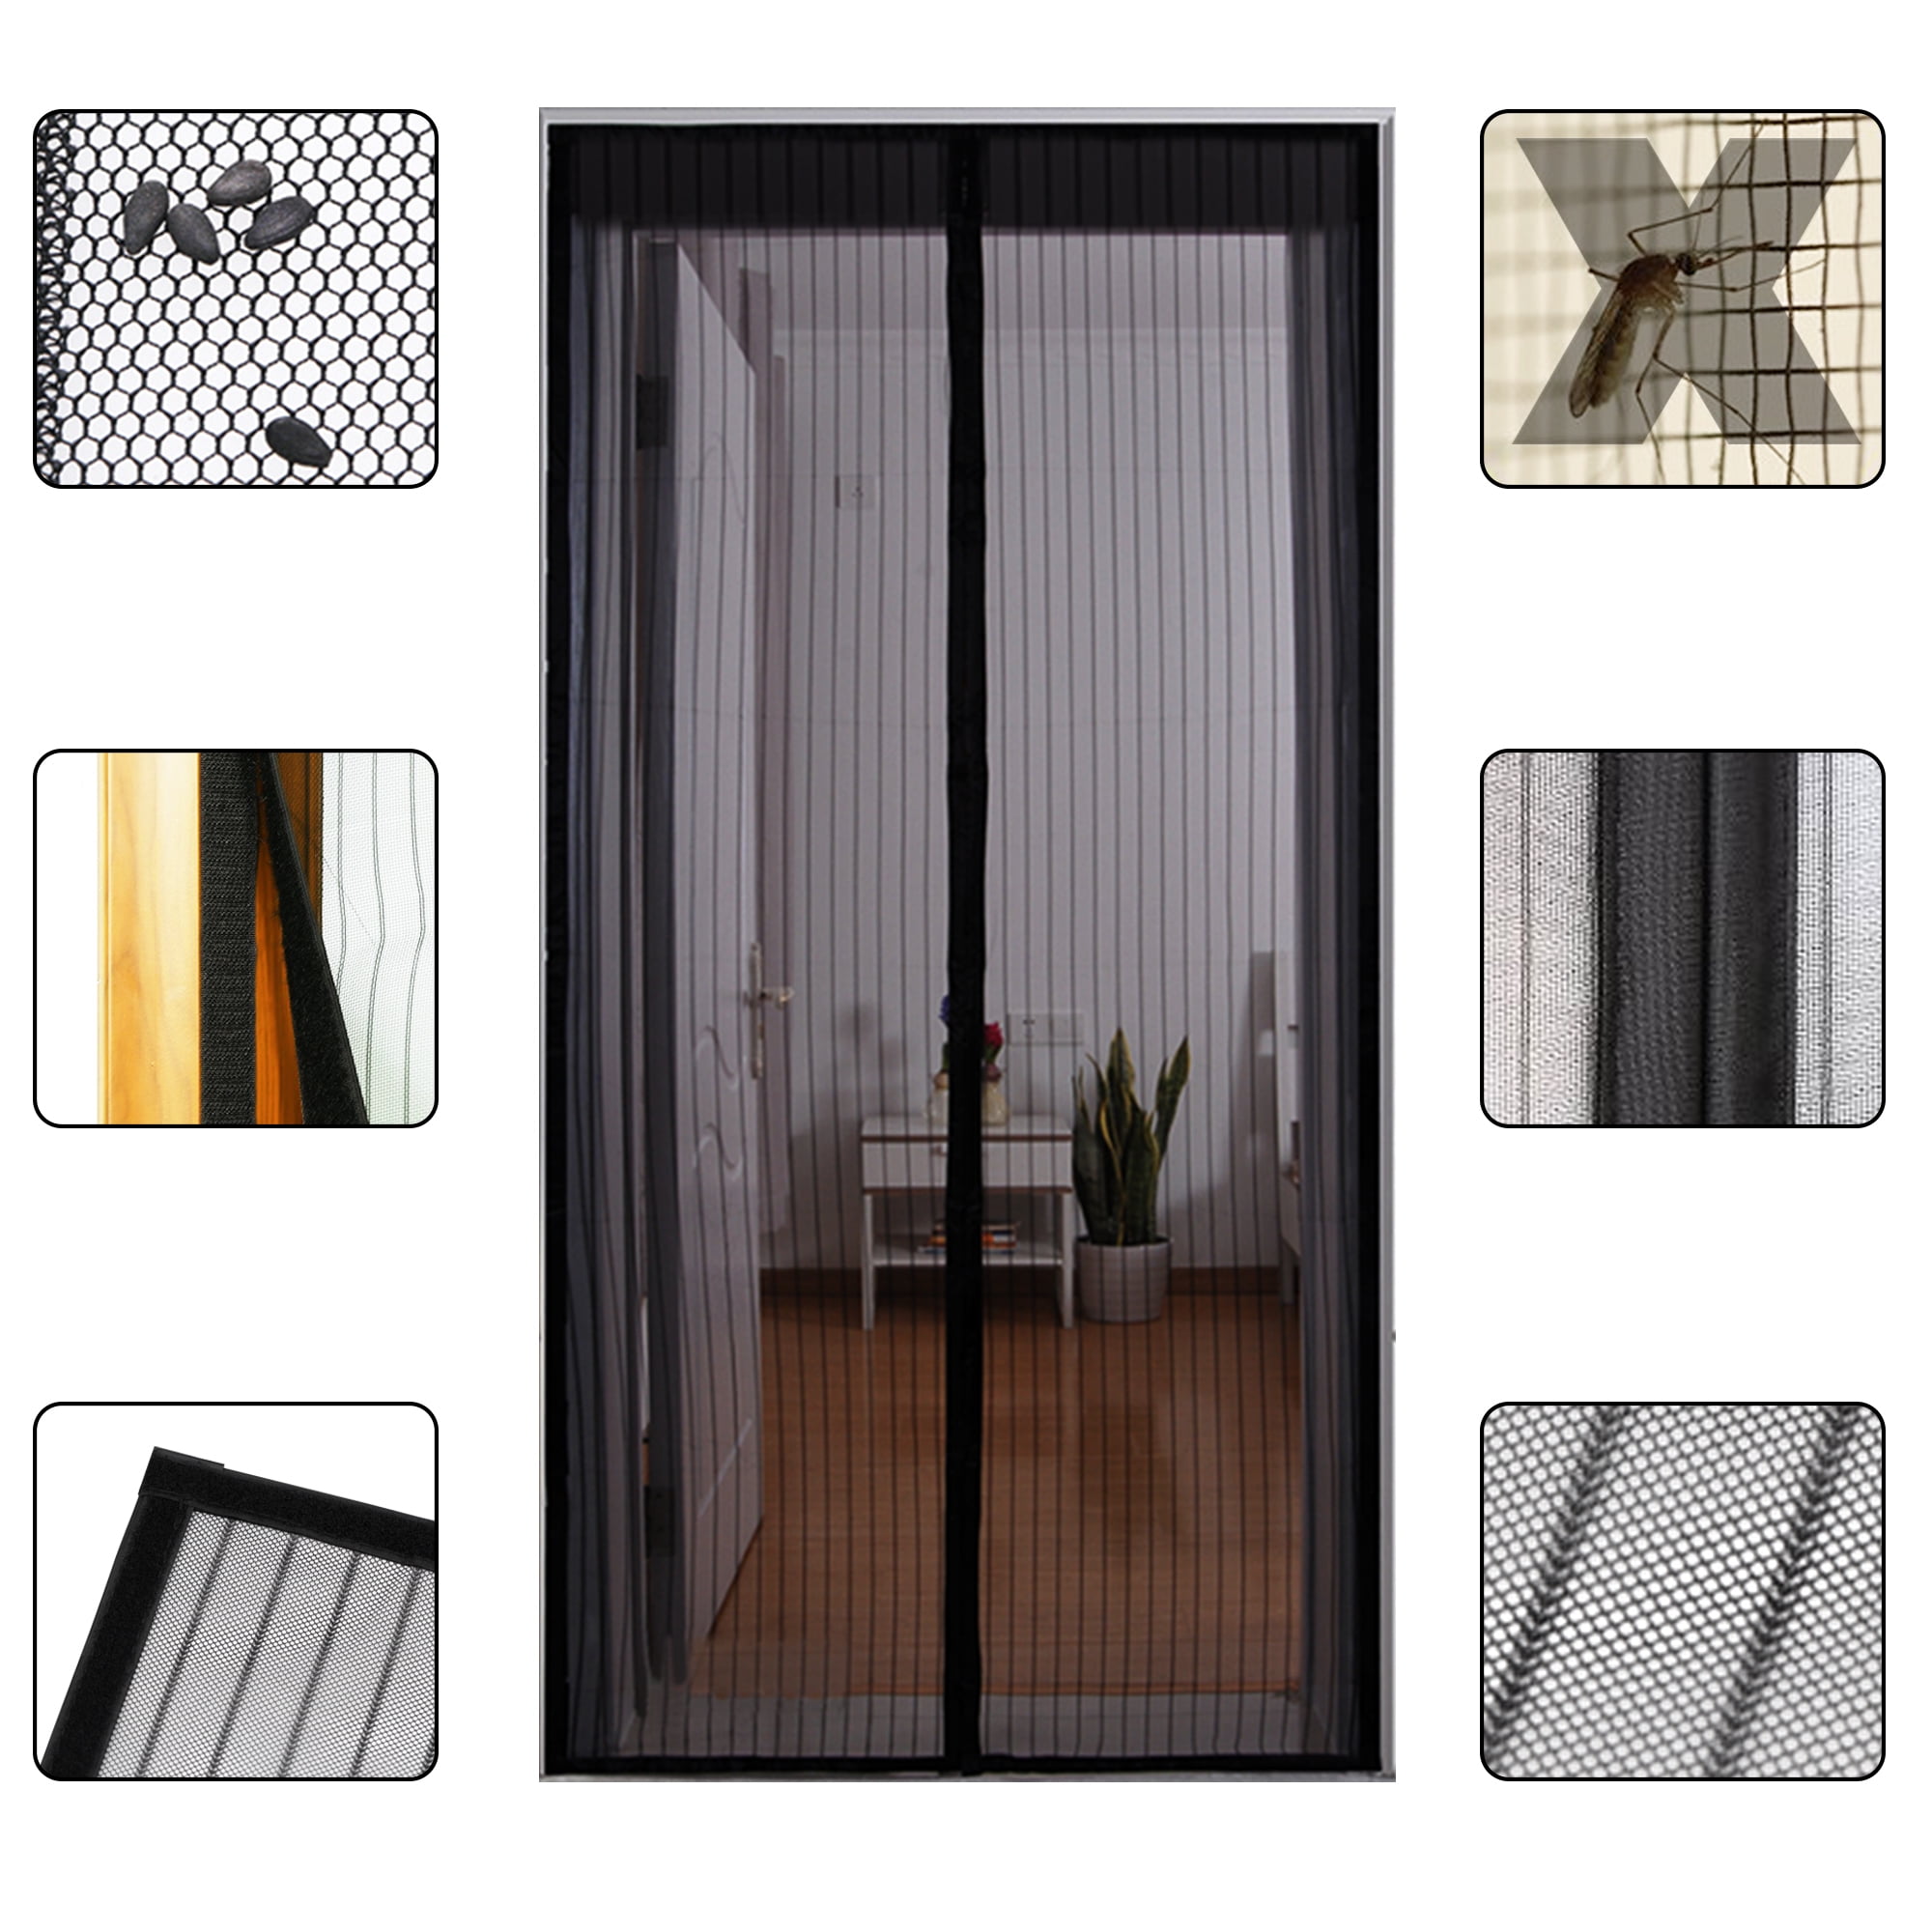 36-82 gdfh Magnetic Screen Doors New 2018 Patent Pending Design Full Frame Velcro and Fiberglass Mesh Polyester This Instantly Retractable Bug Screen. Fits Doors up to 36 x 82-inch 